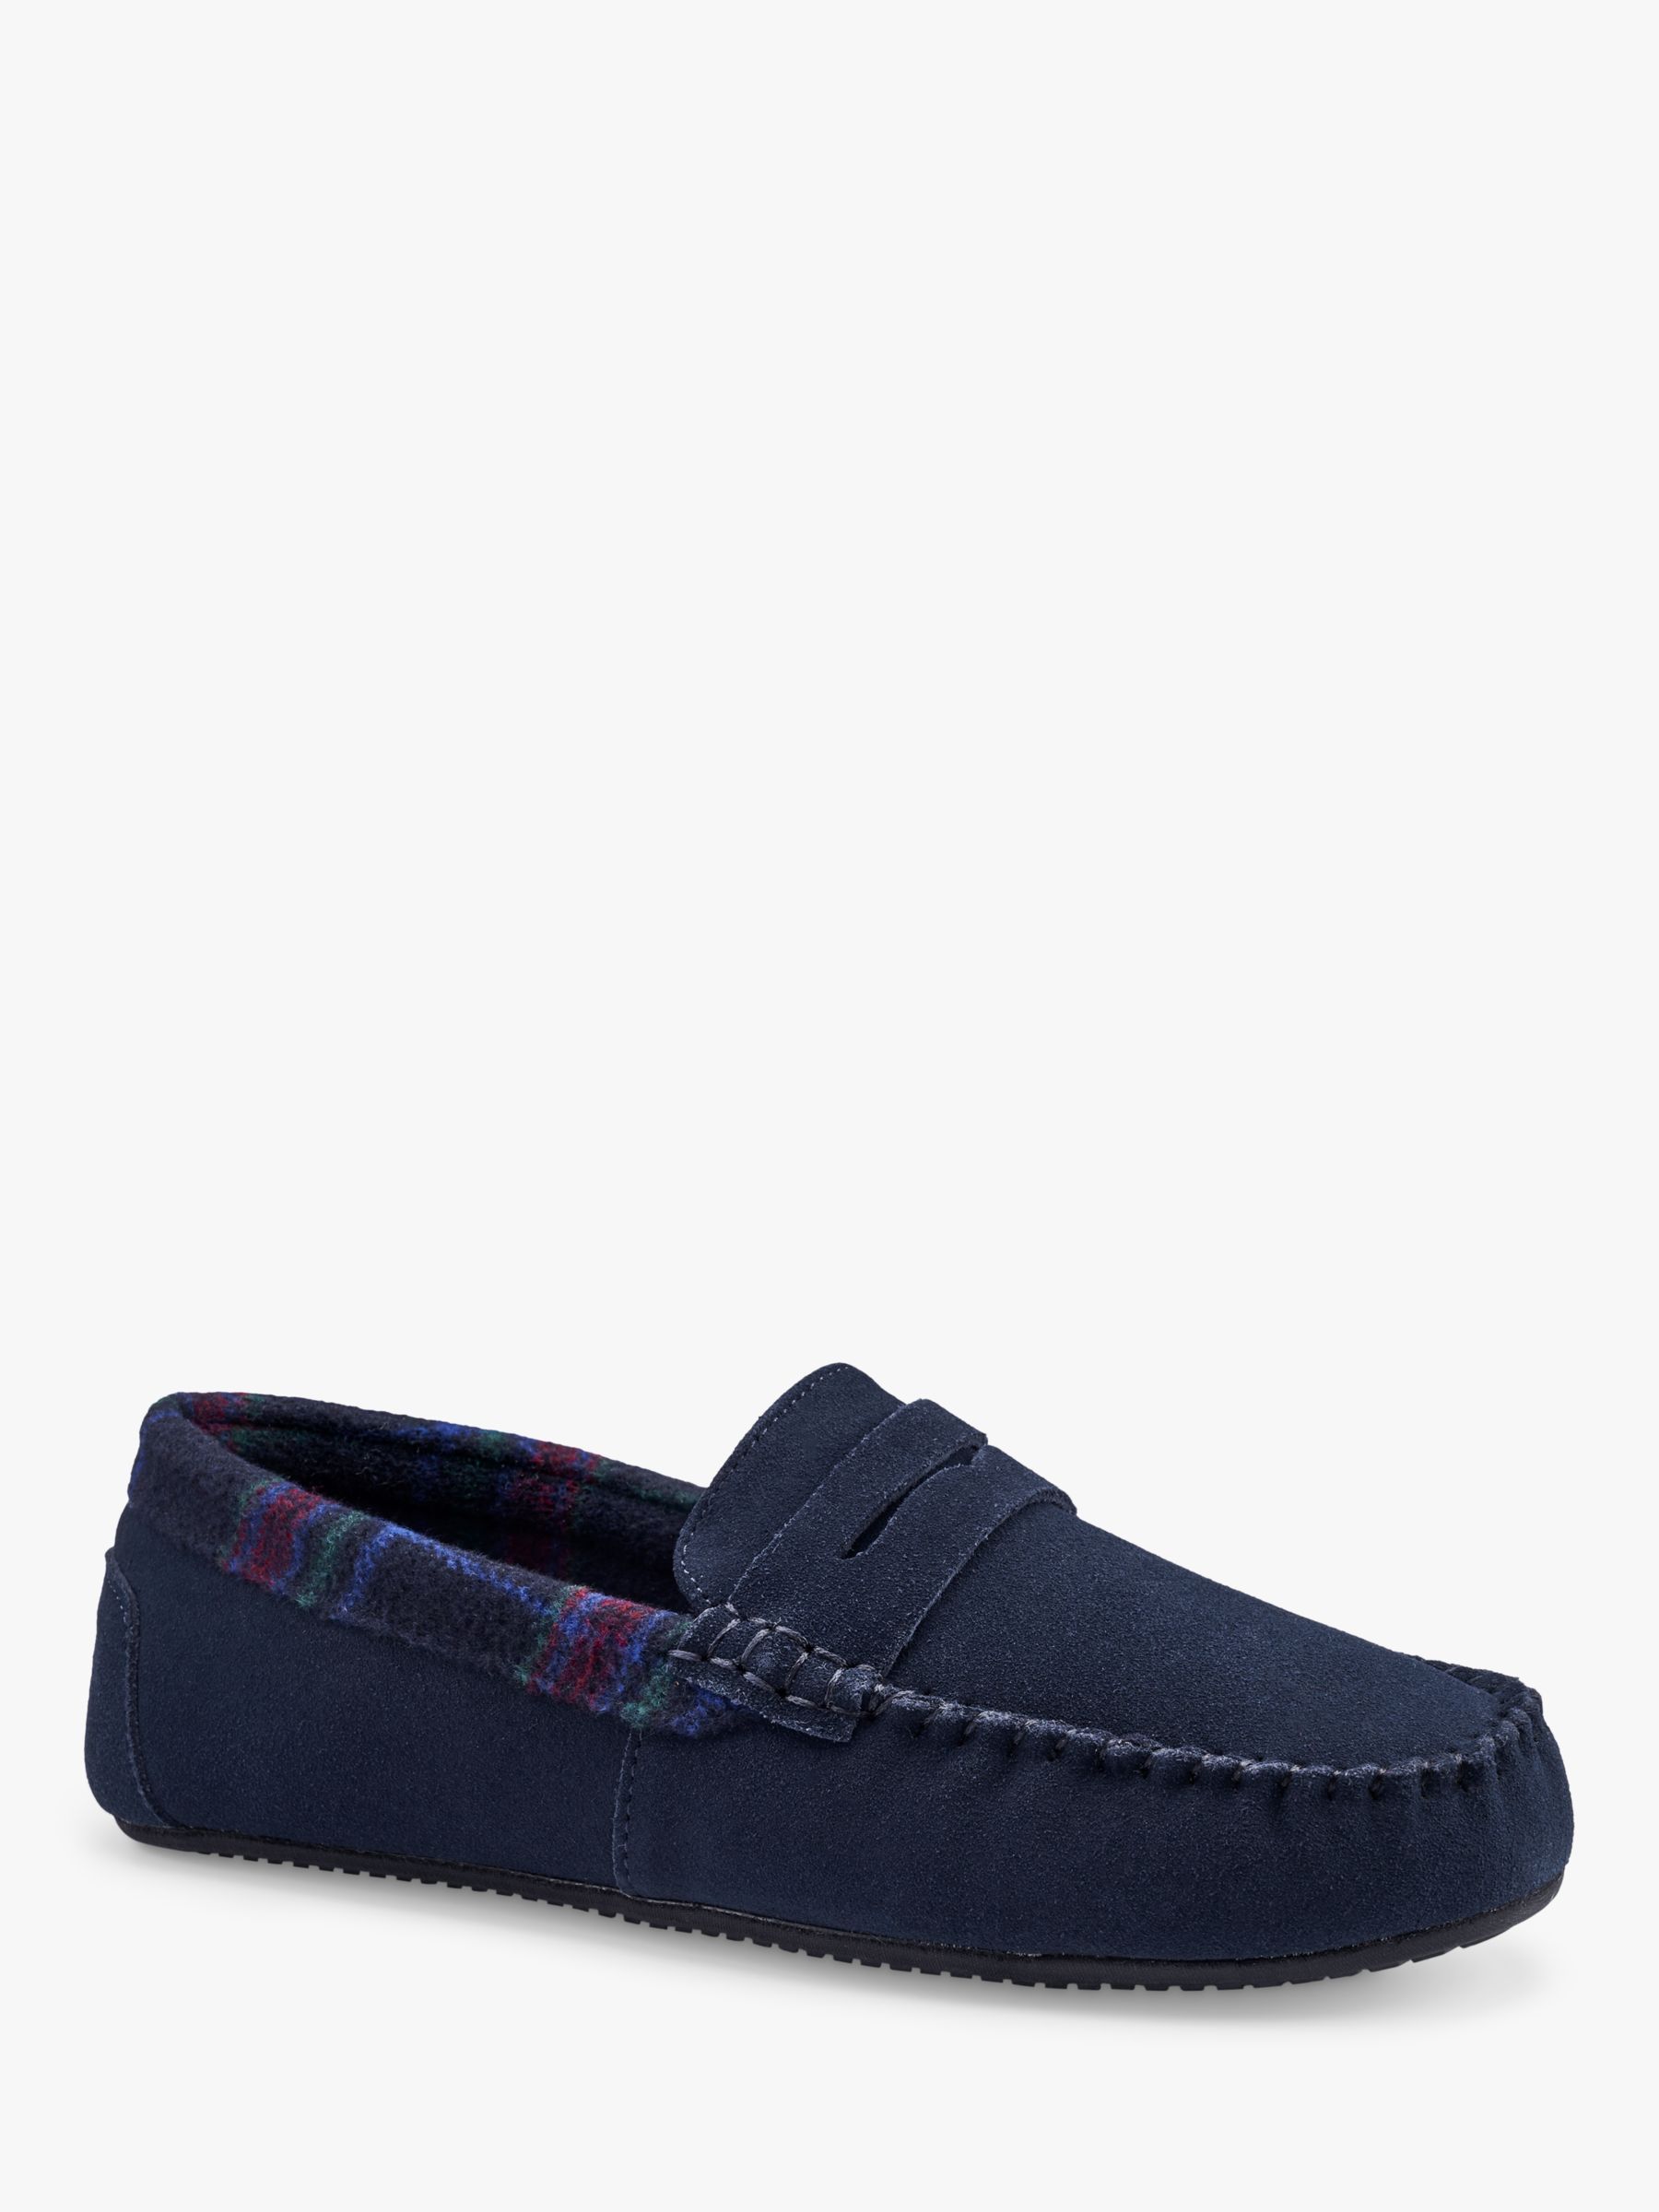 Hotter Repose Moccasin Slippers, Navy, 9